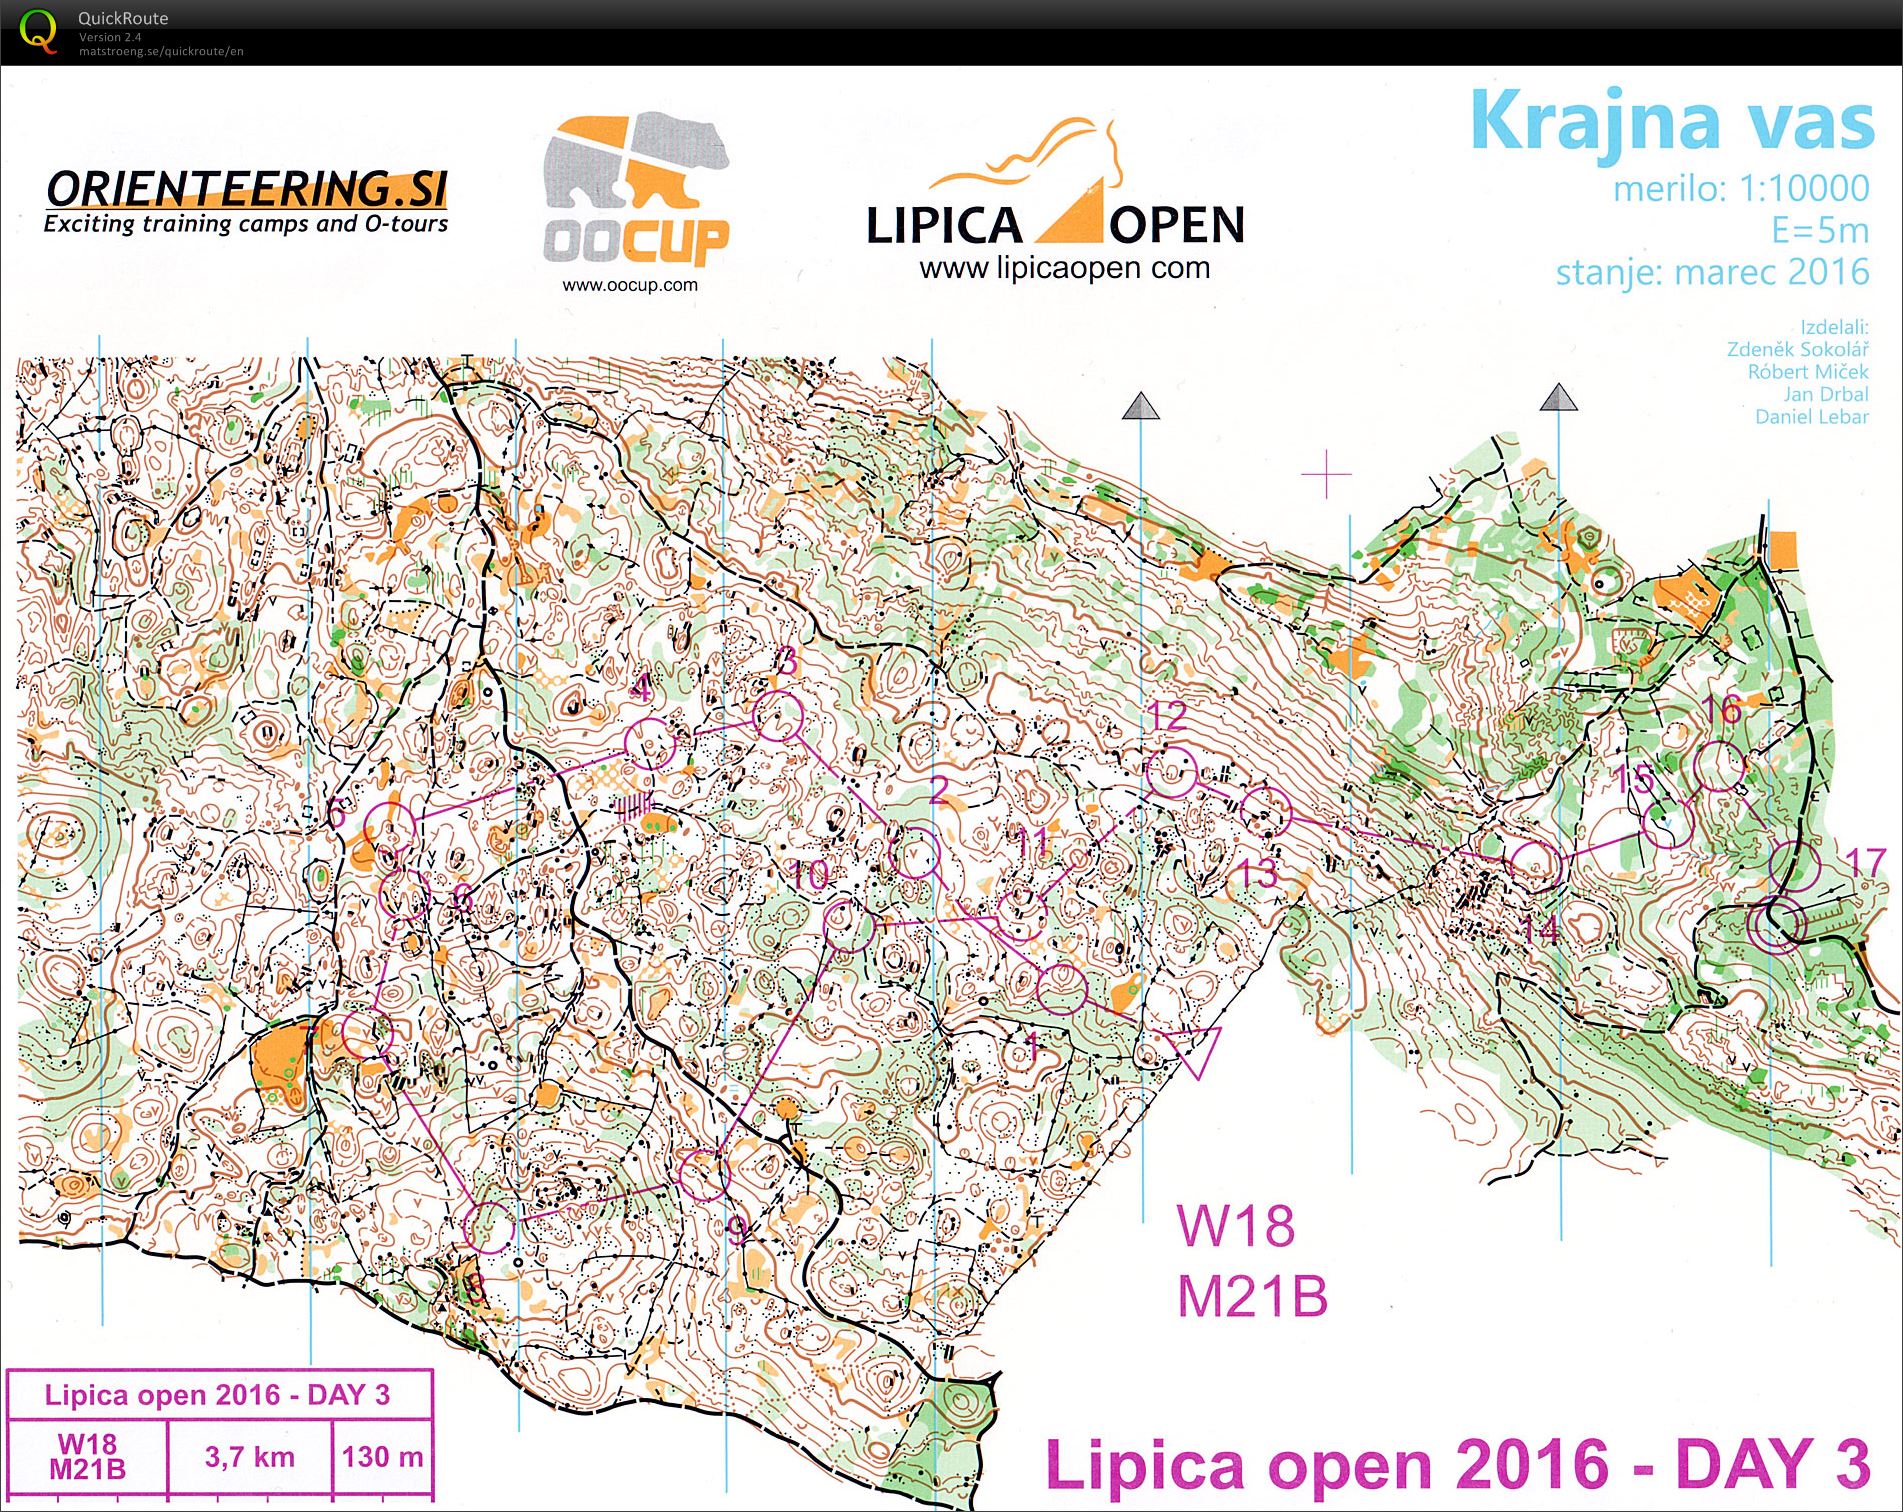 Lipica Open 2016 Day 3 (14/03/2016)